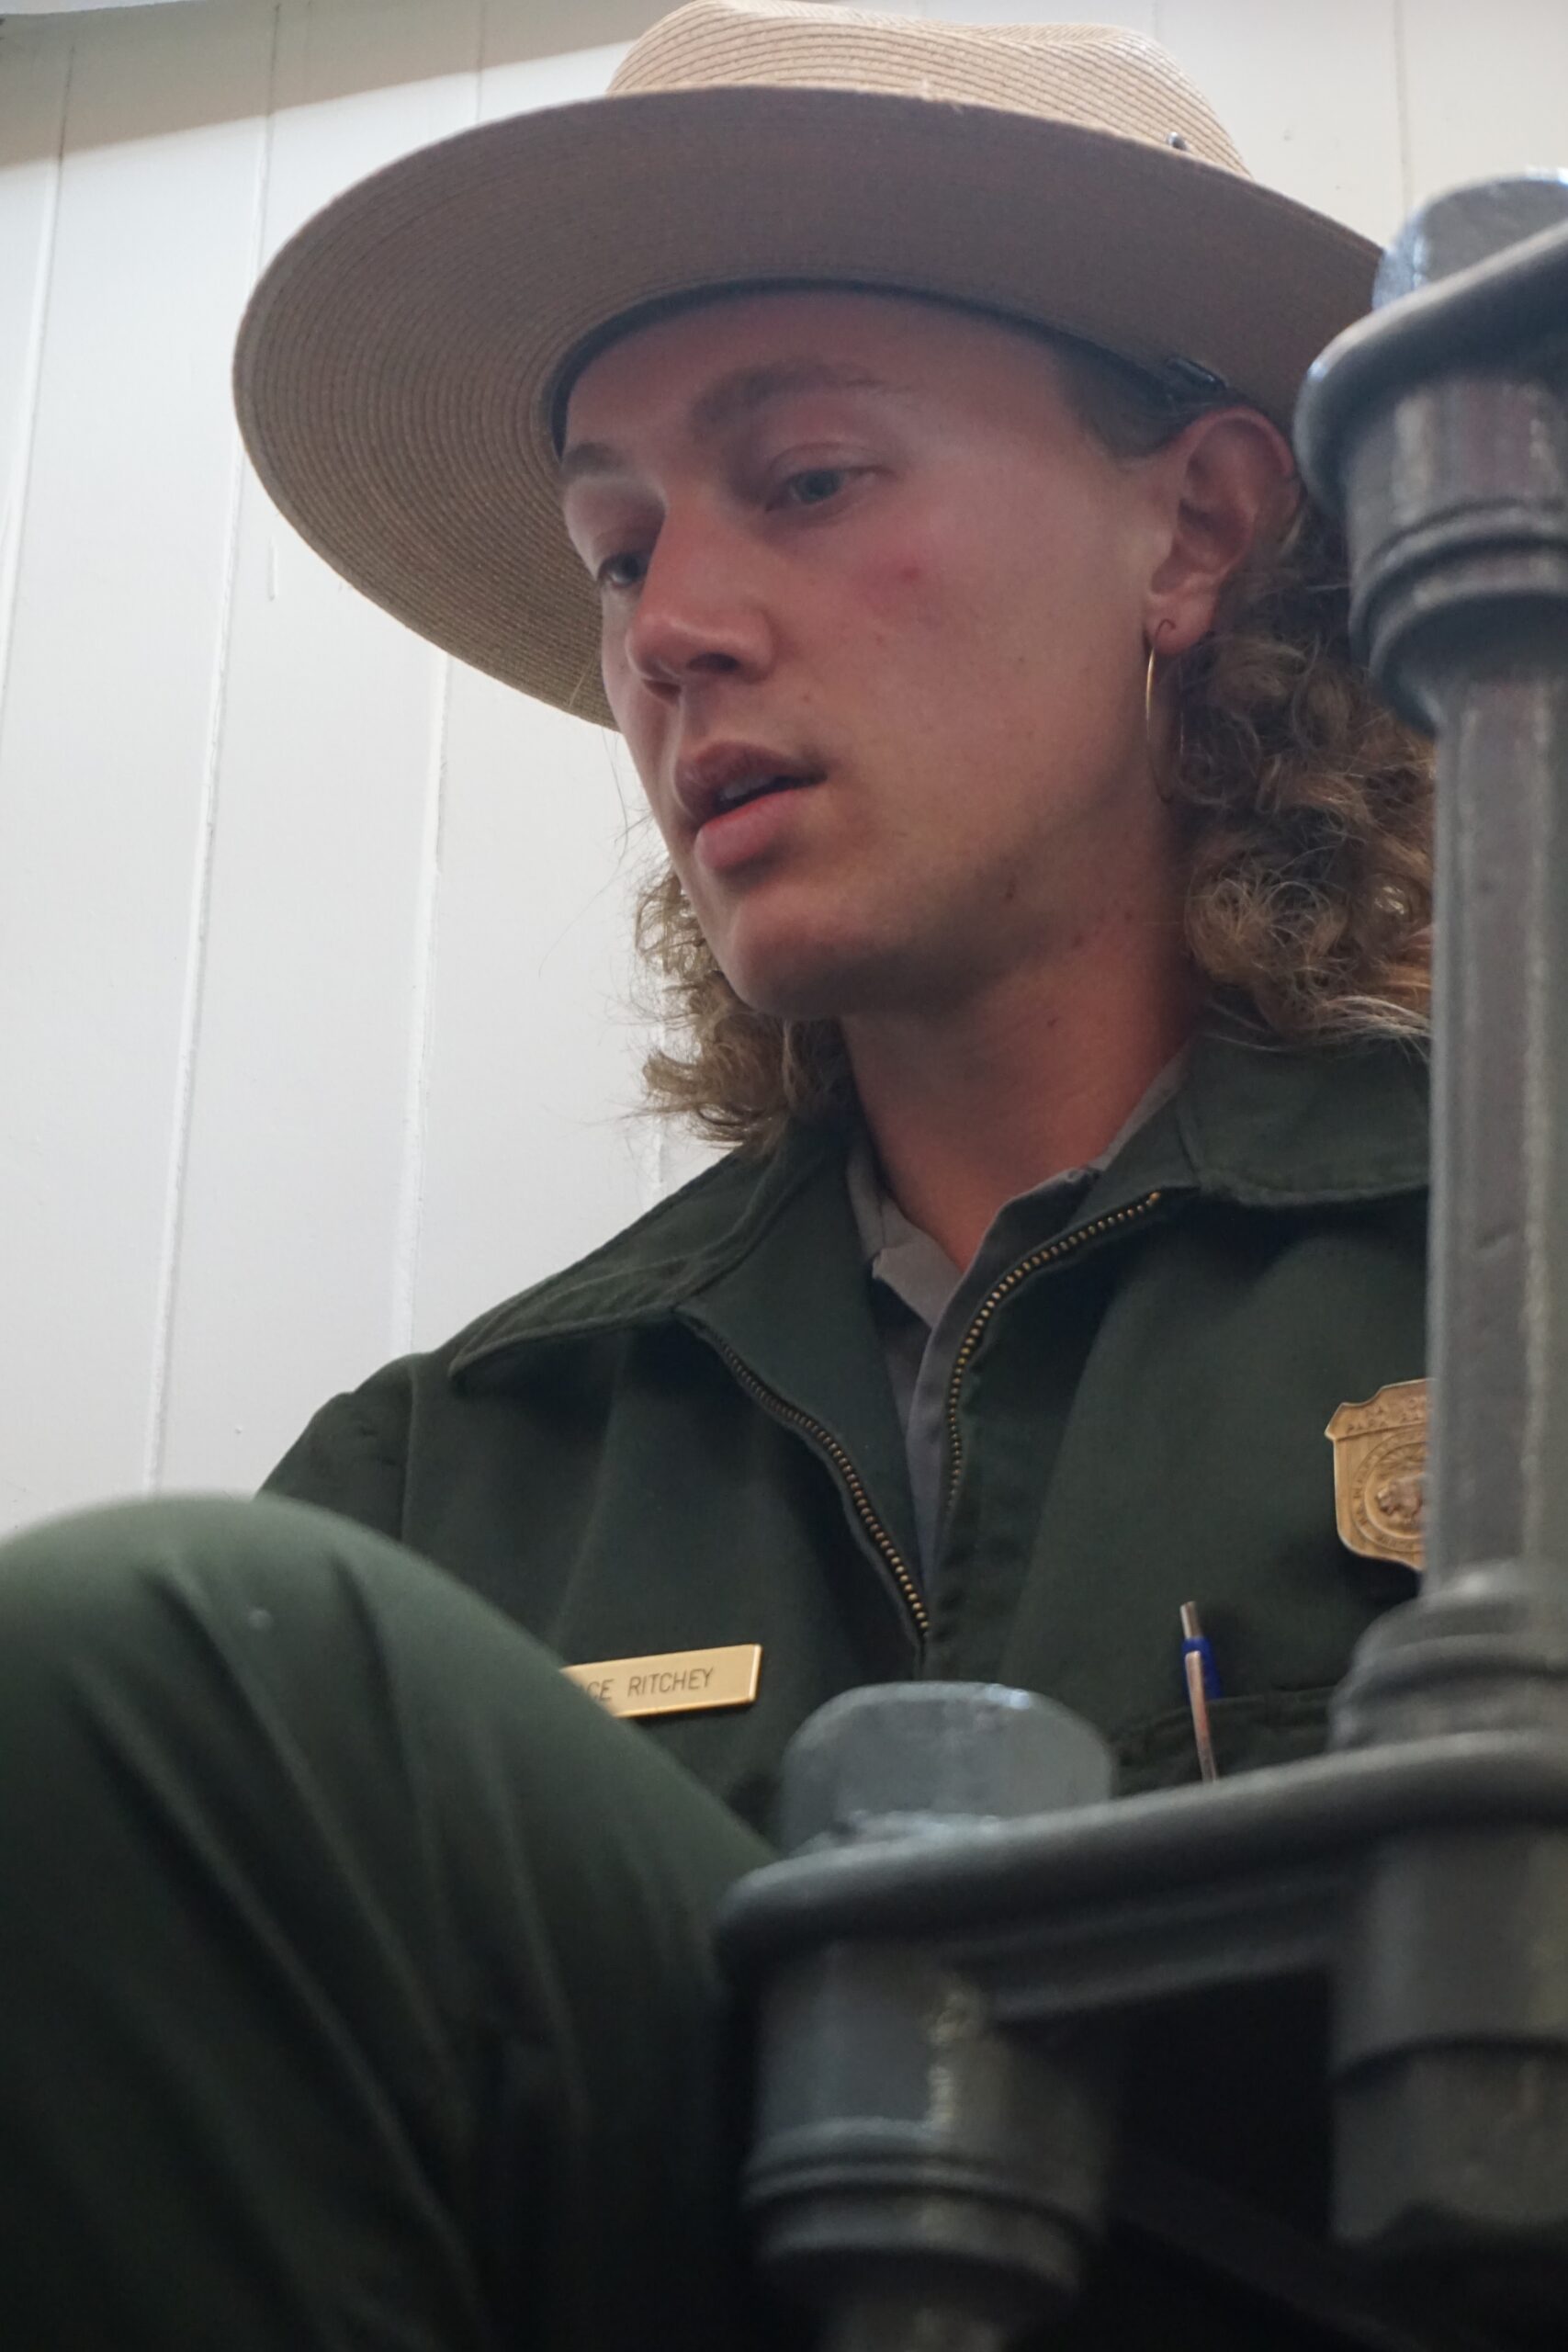 Ranger Ritchey inside the lighthouse